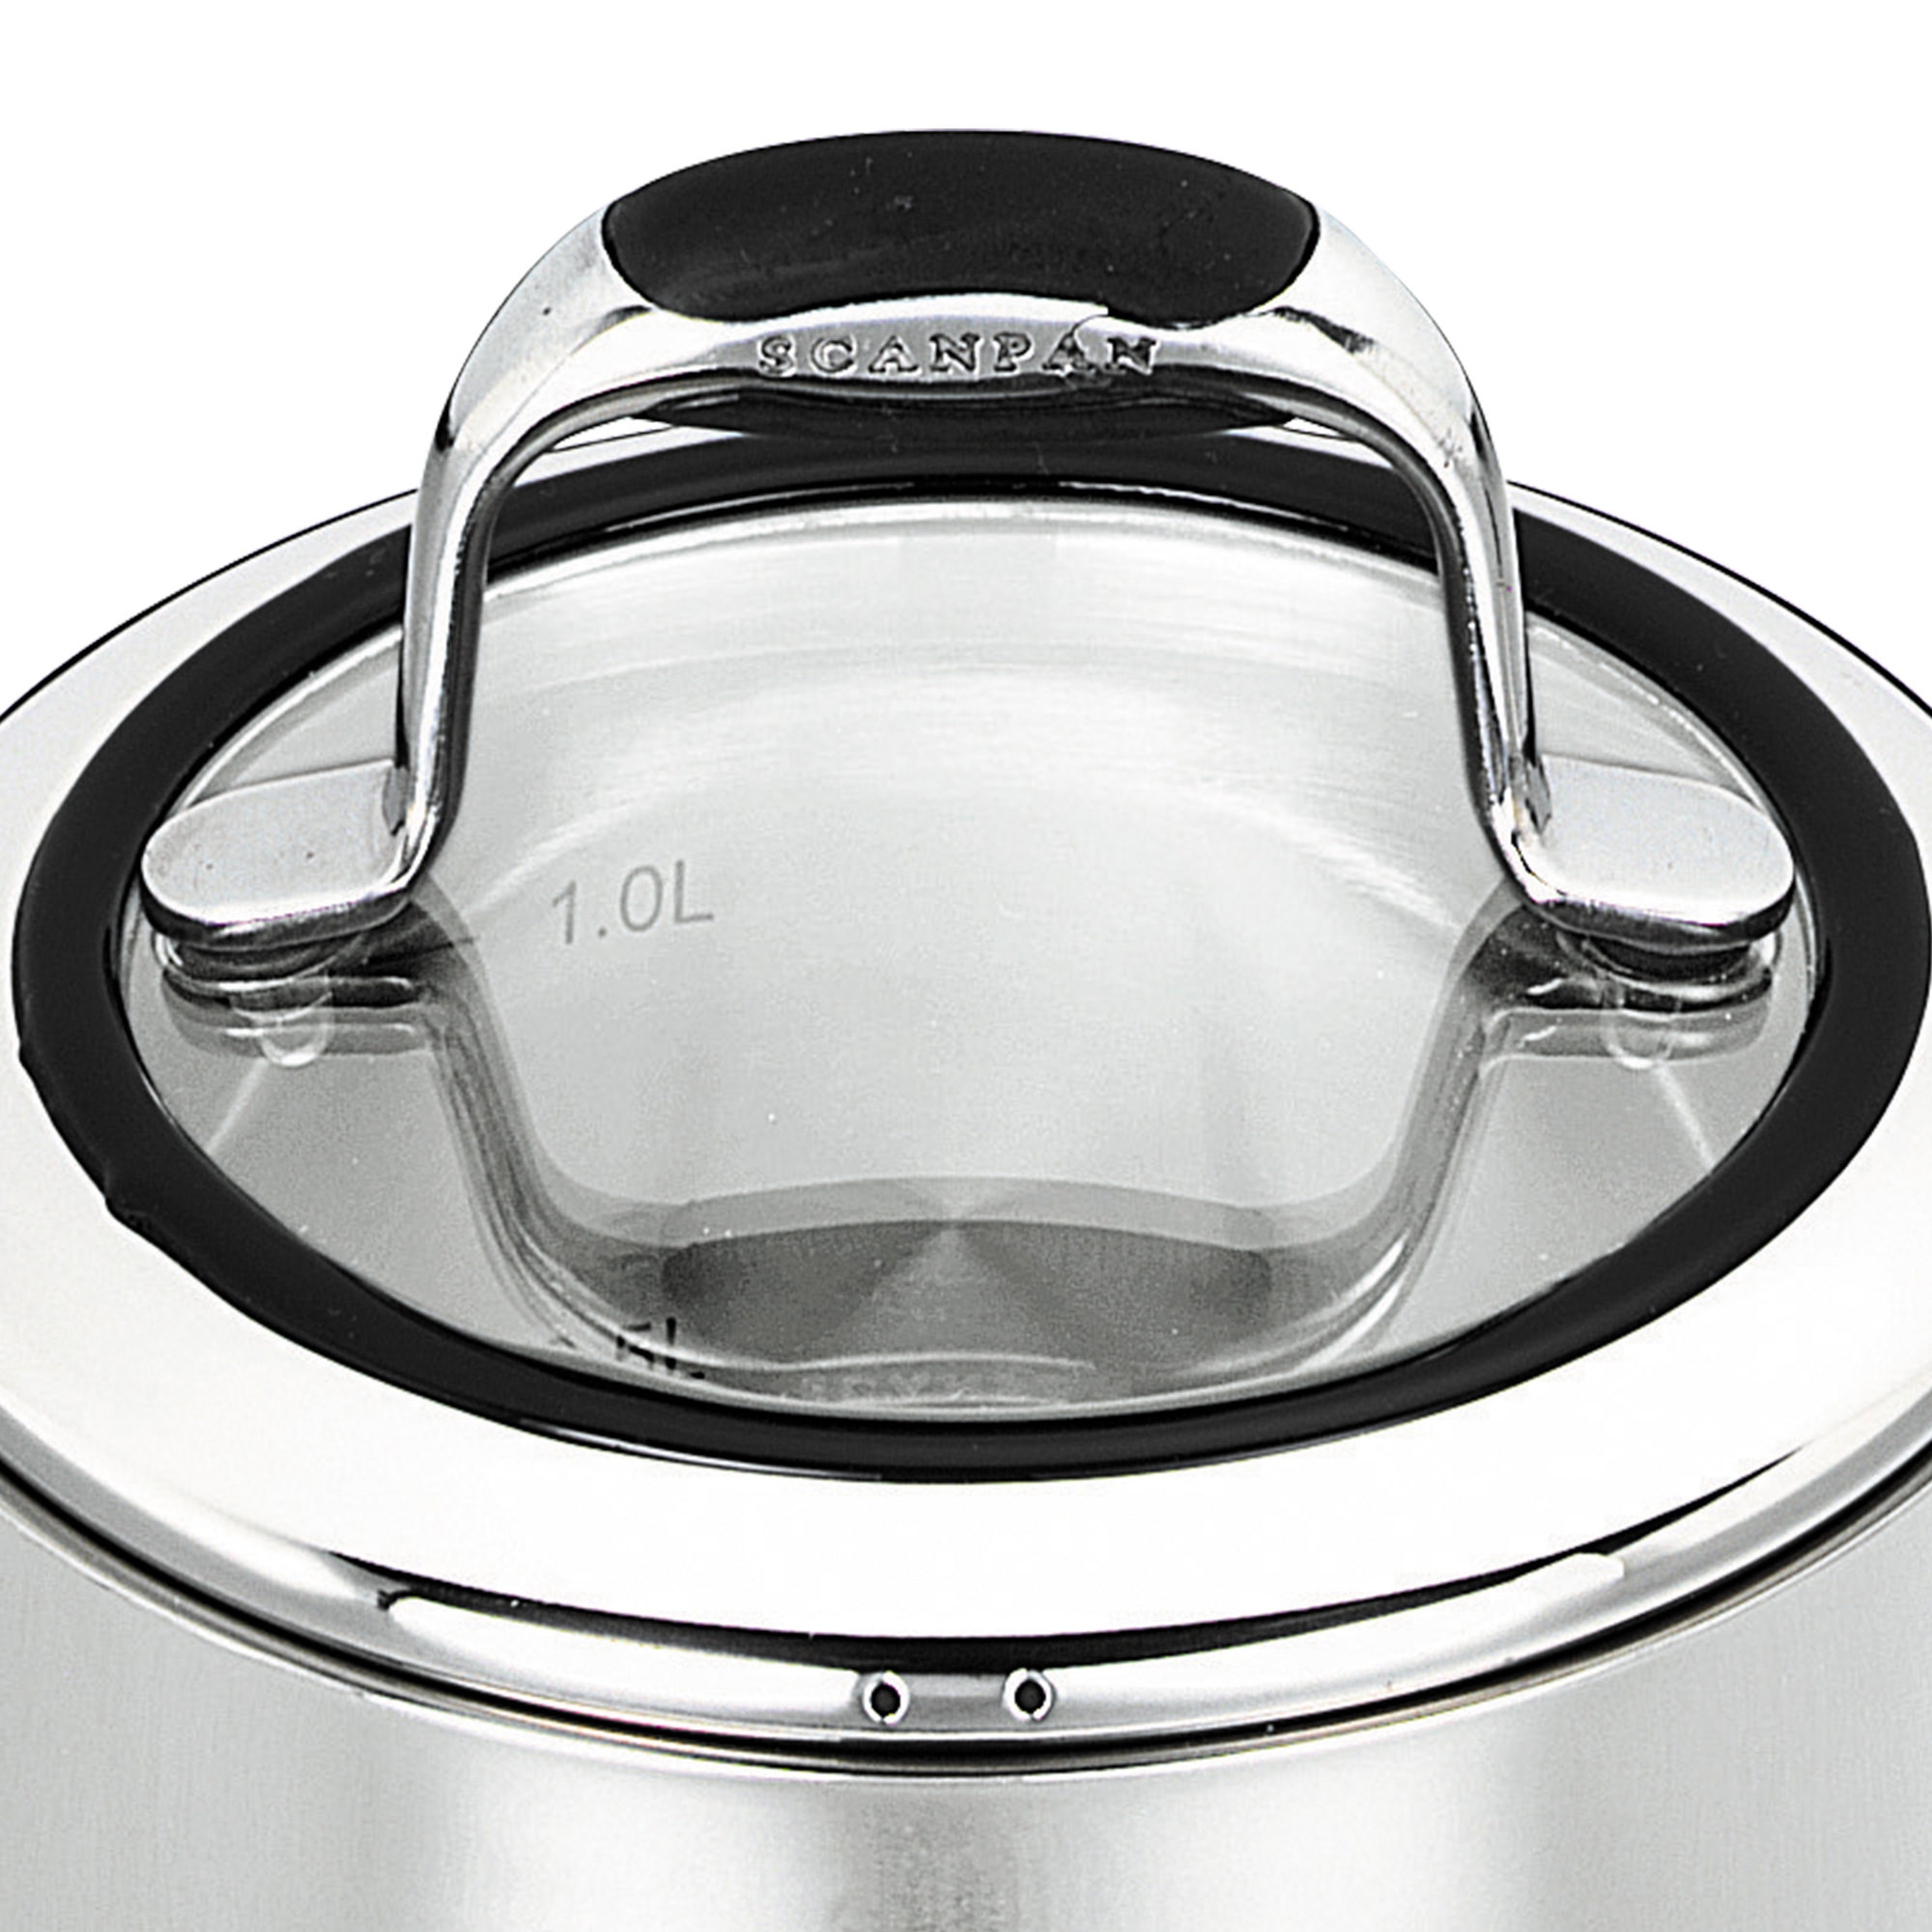 Scanpan Coppernox Stainless Steel Covered Saucepan 14cm - 1.2L Image 2